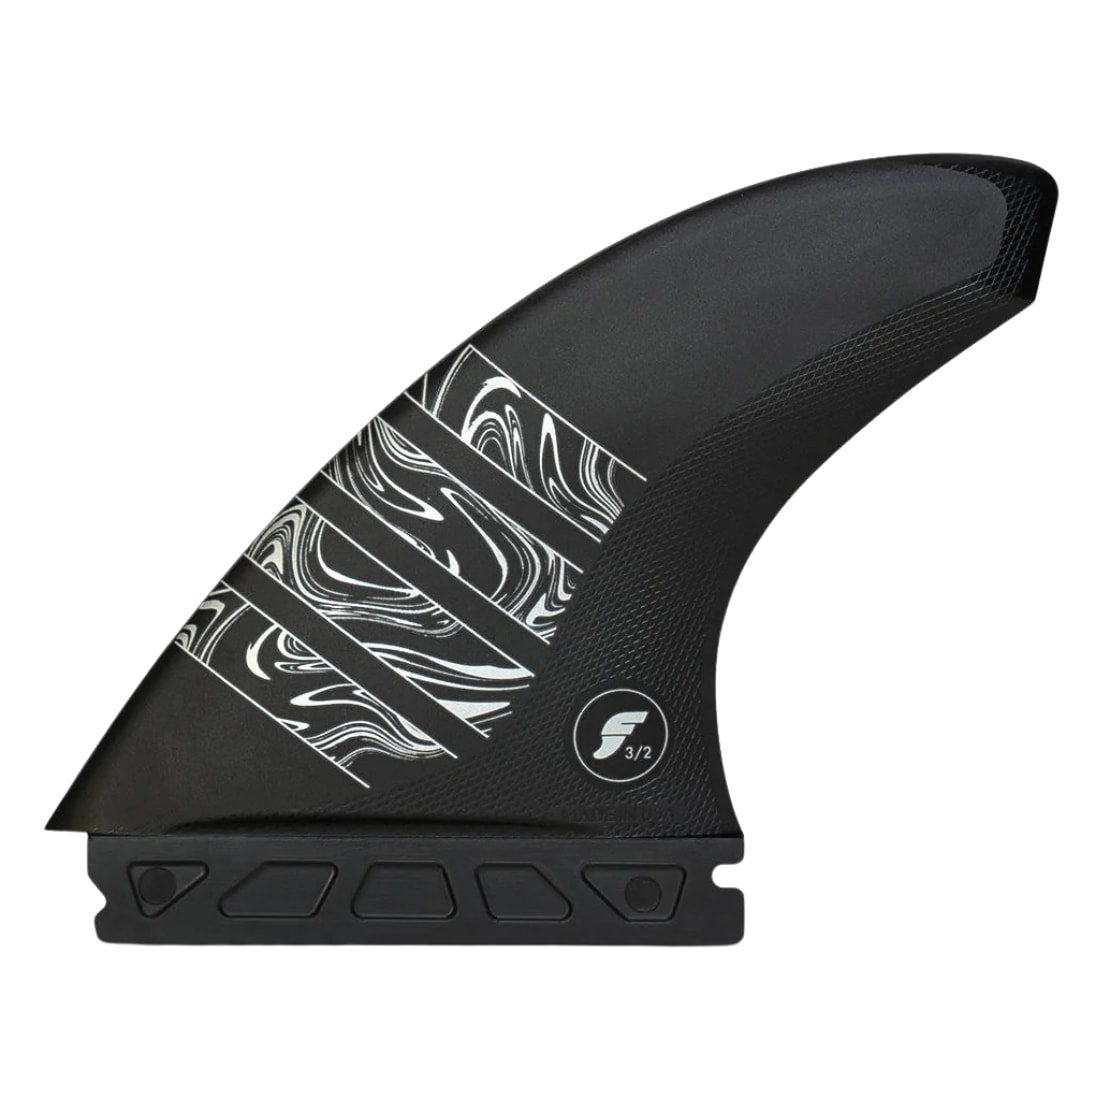 Futures Vector 3/2 Alpha Large Thruster Surfboard Fins - Carbon/Silver - Futures Fins by Futures Large Fins